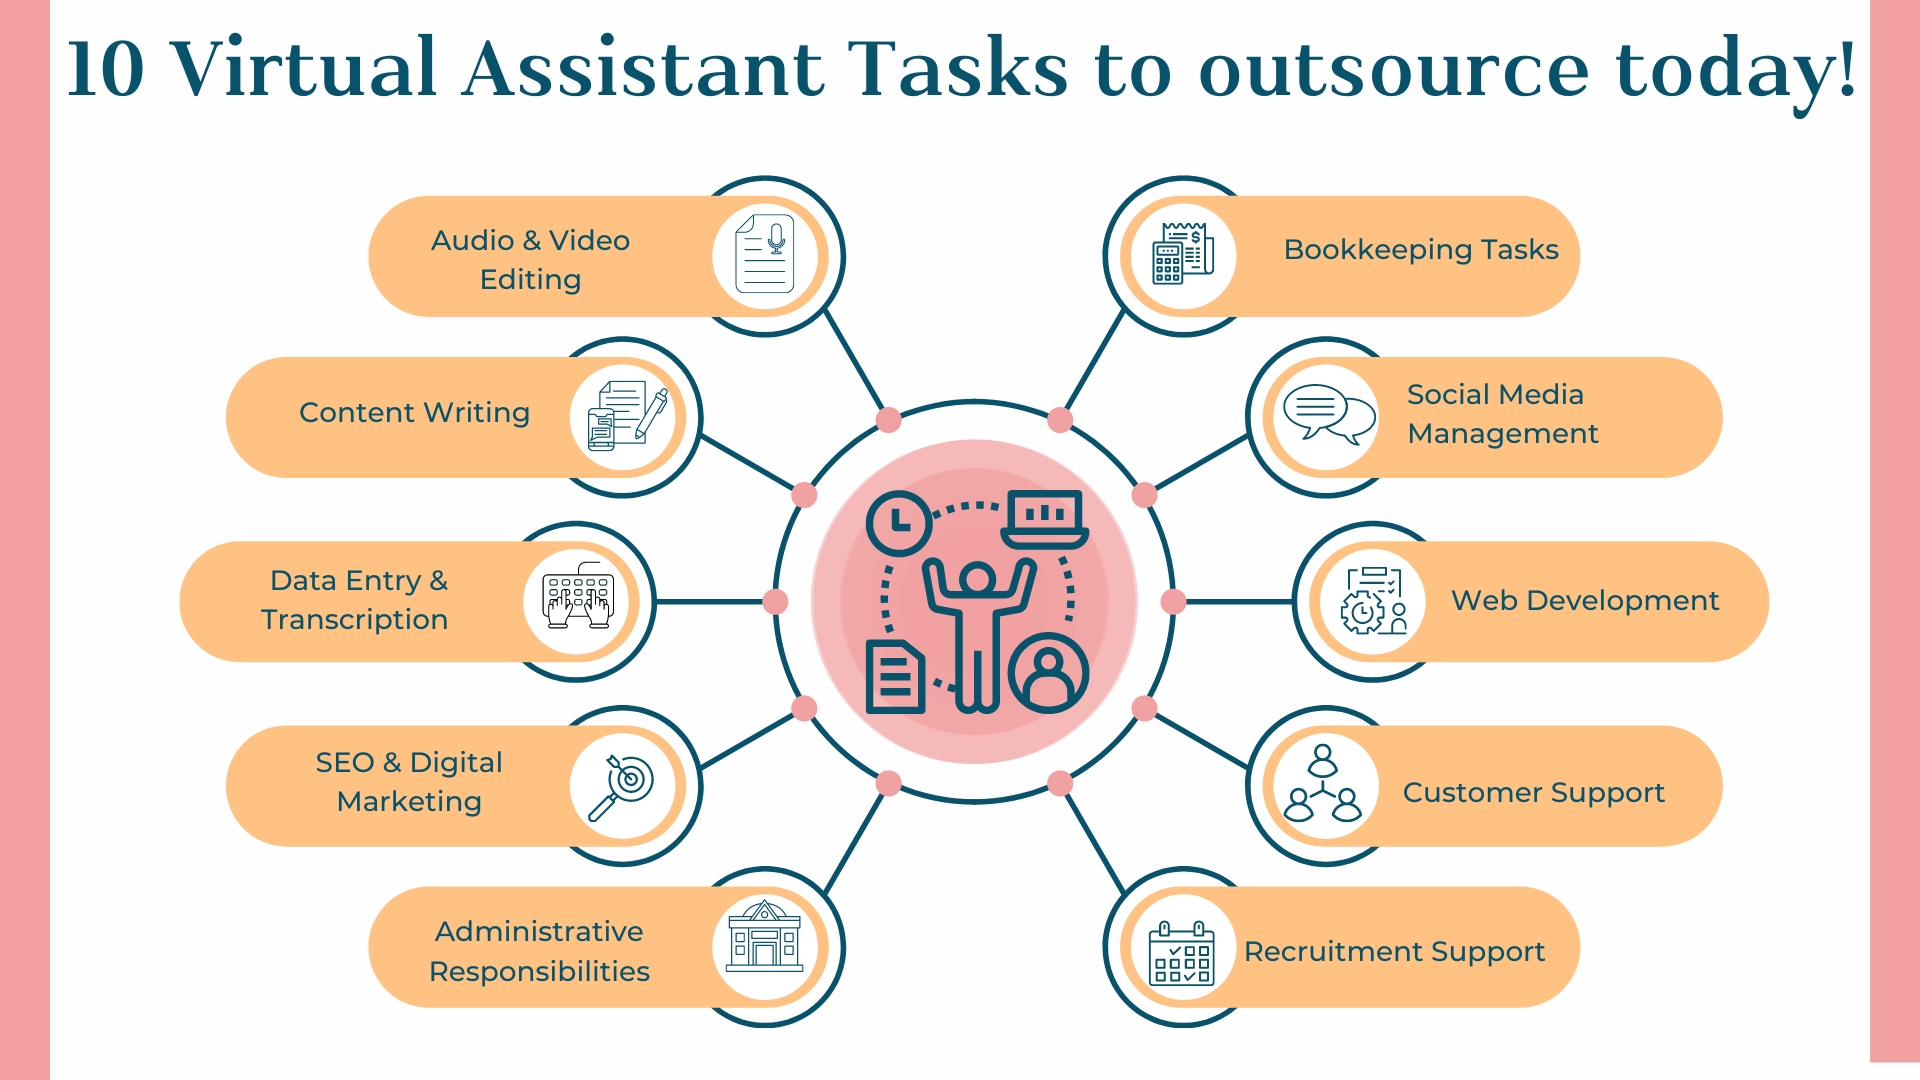 10 Virtual Assistant Tasks to outsource today!